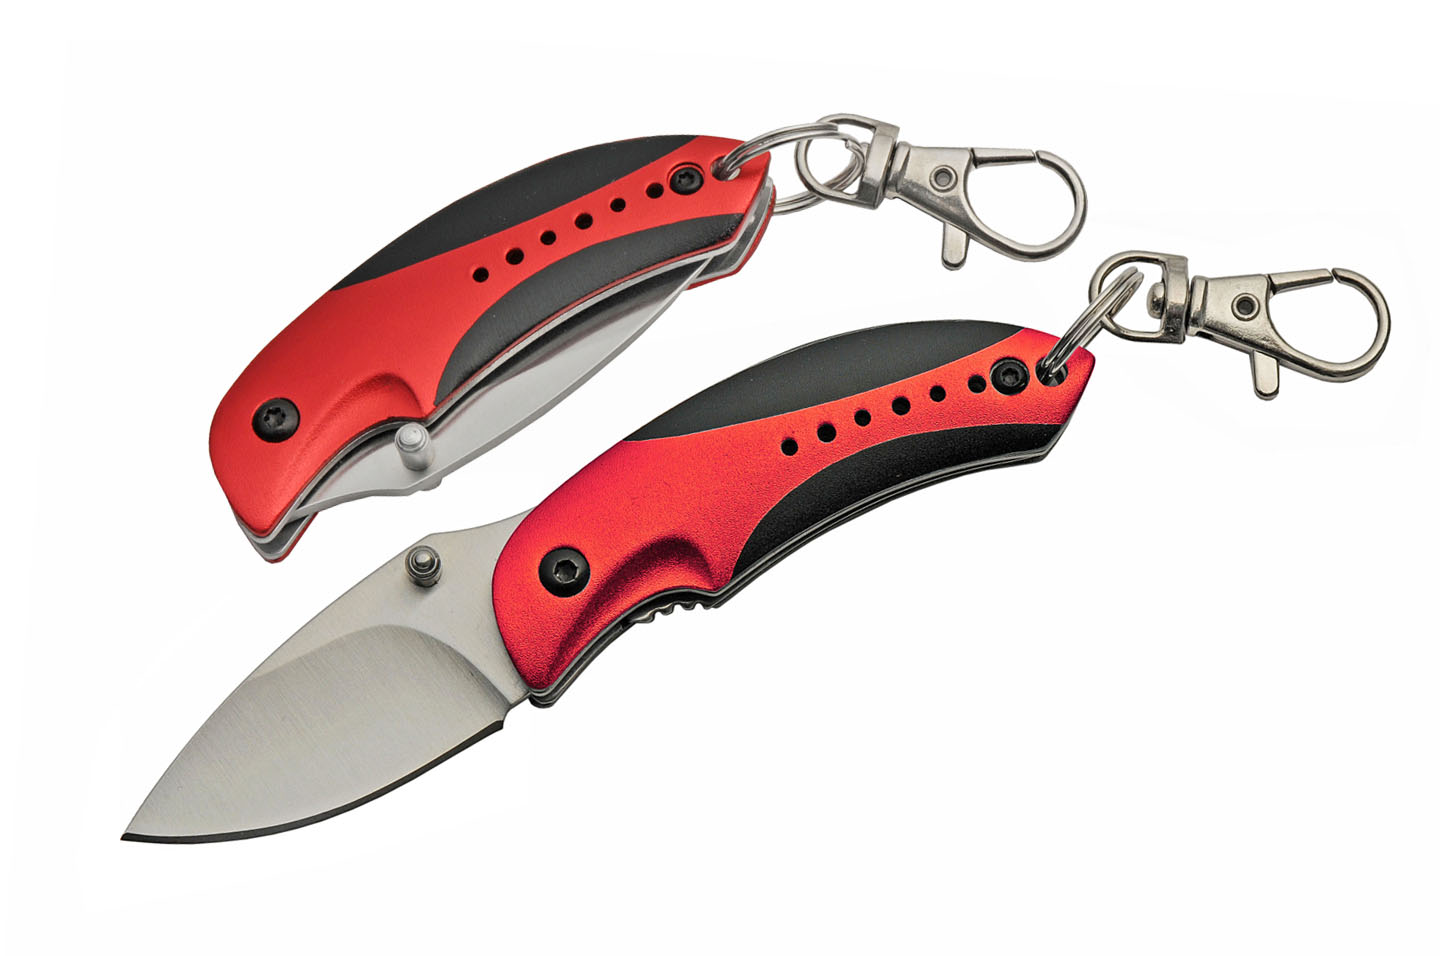 Spring-Assisted Folding Knife Rite Edge 1.75in Blade EDC With Carabiner Red/Black